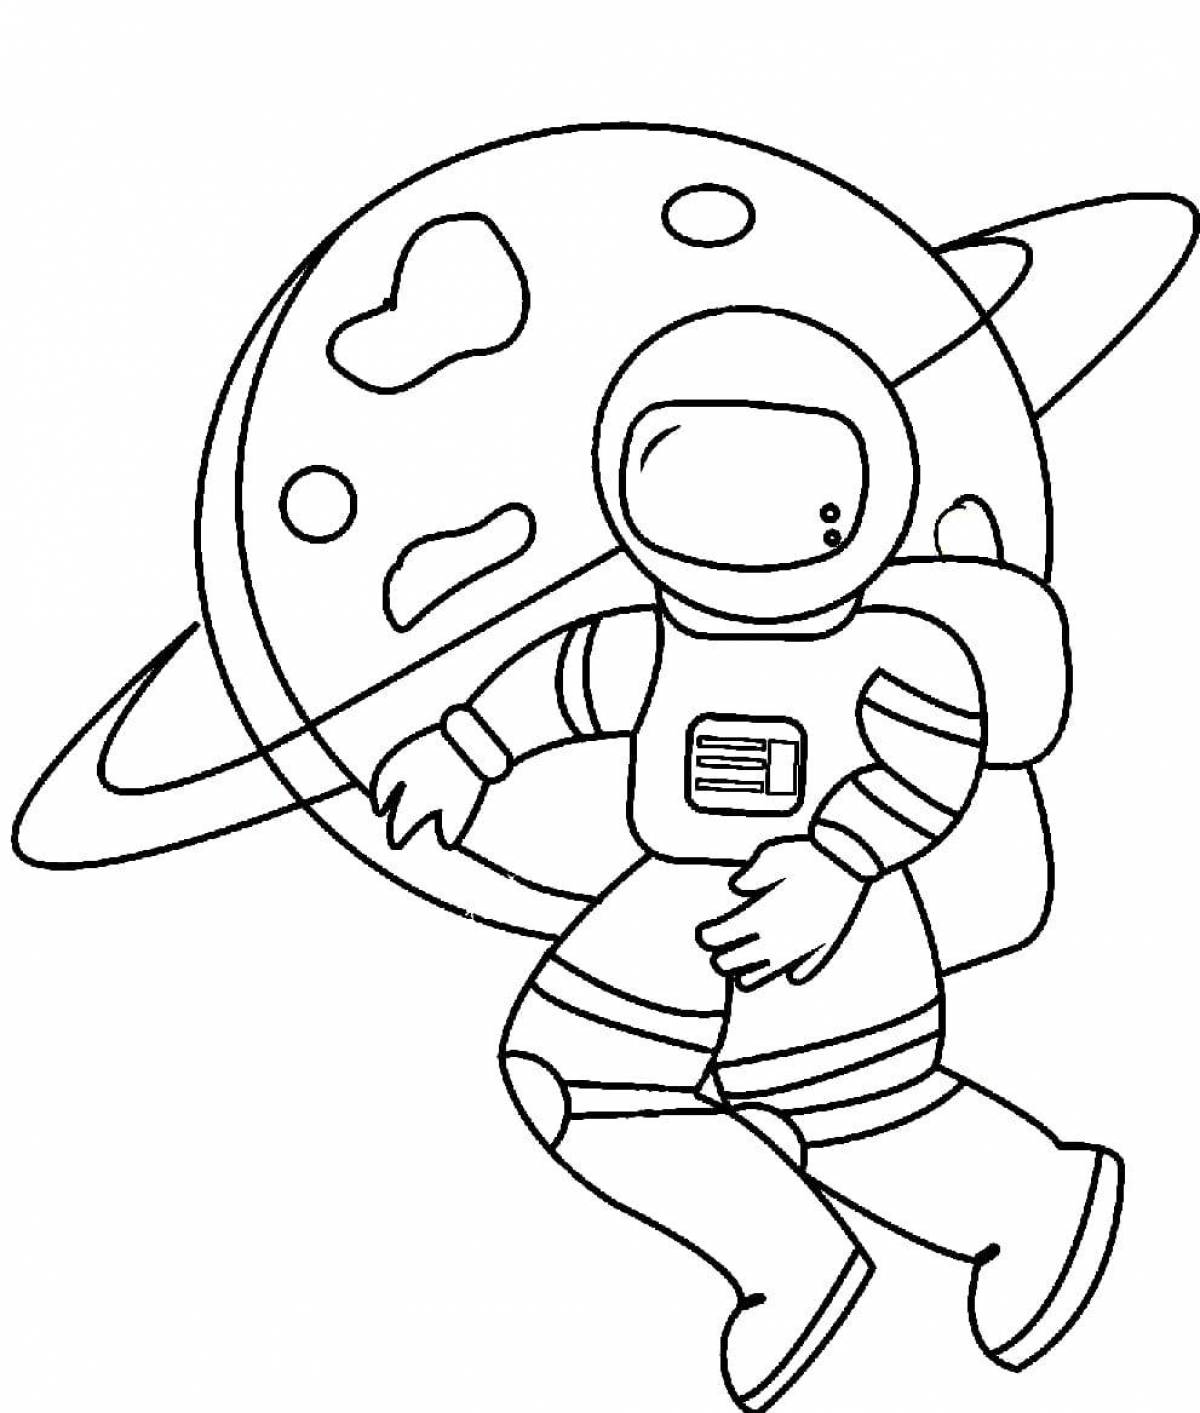 Exciting astronaut coloring book